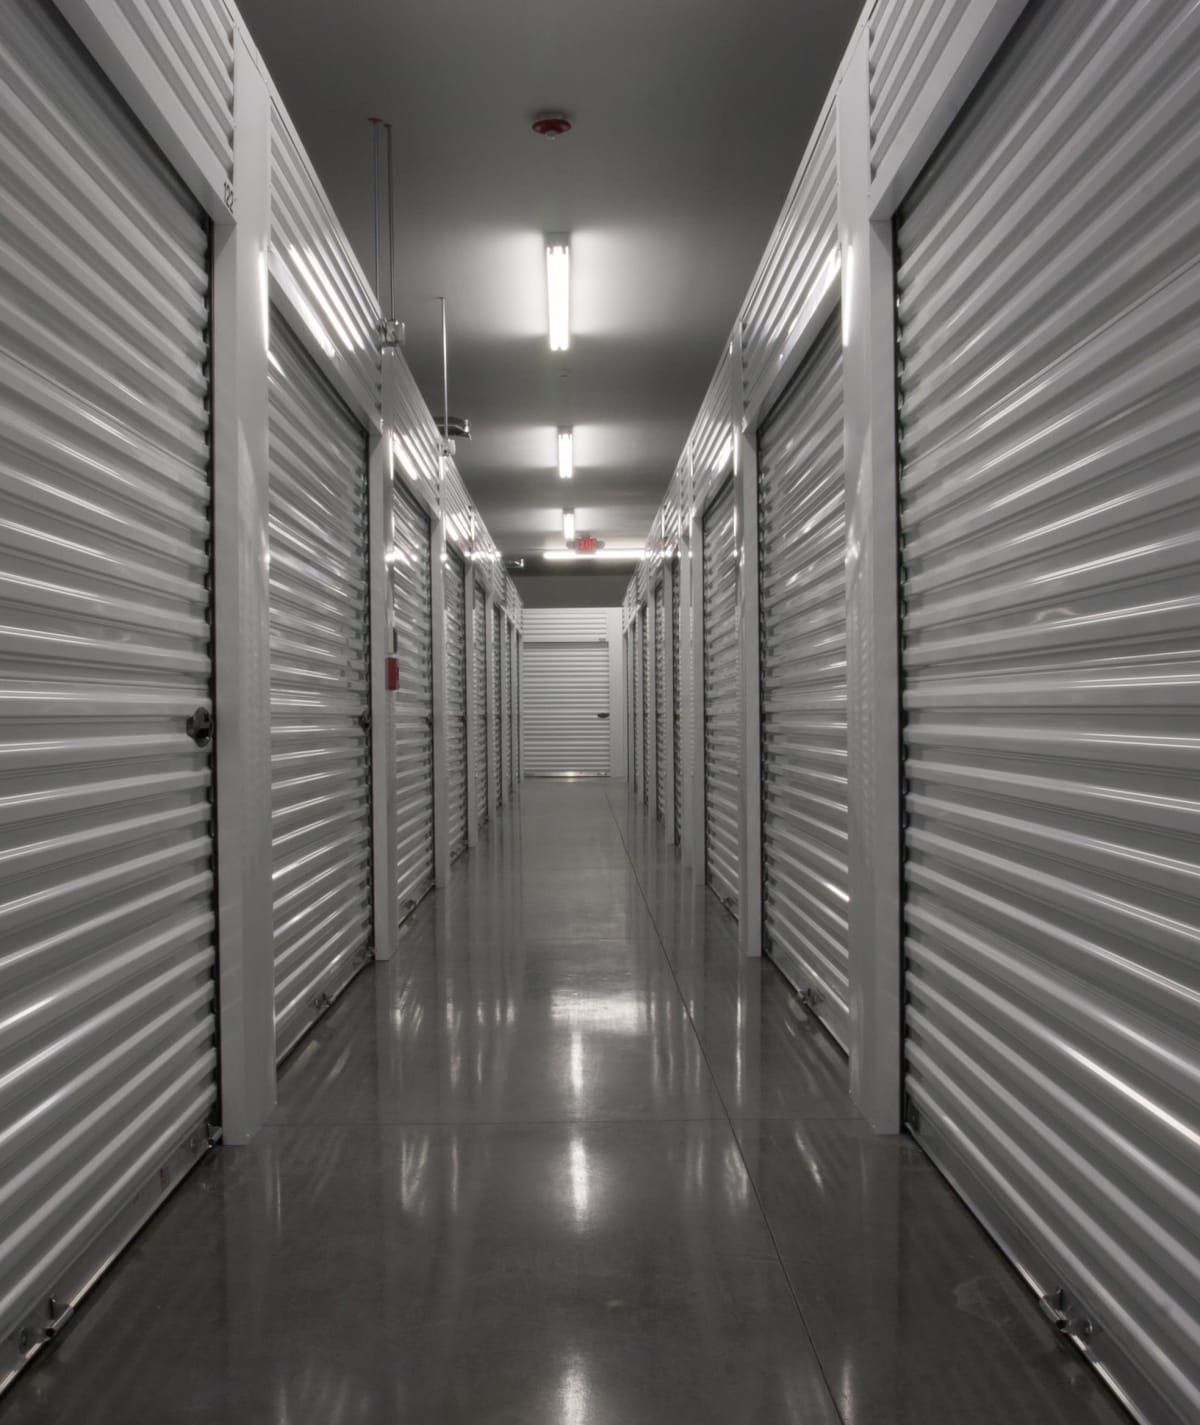 Contact us today at American Self Storage - Archdale in Archdale, North Carolina